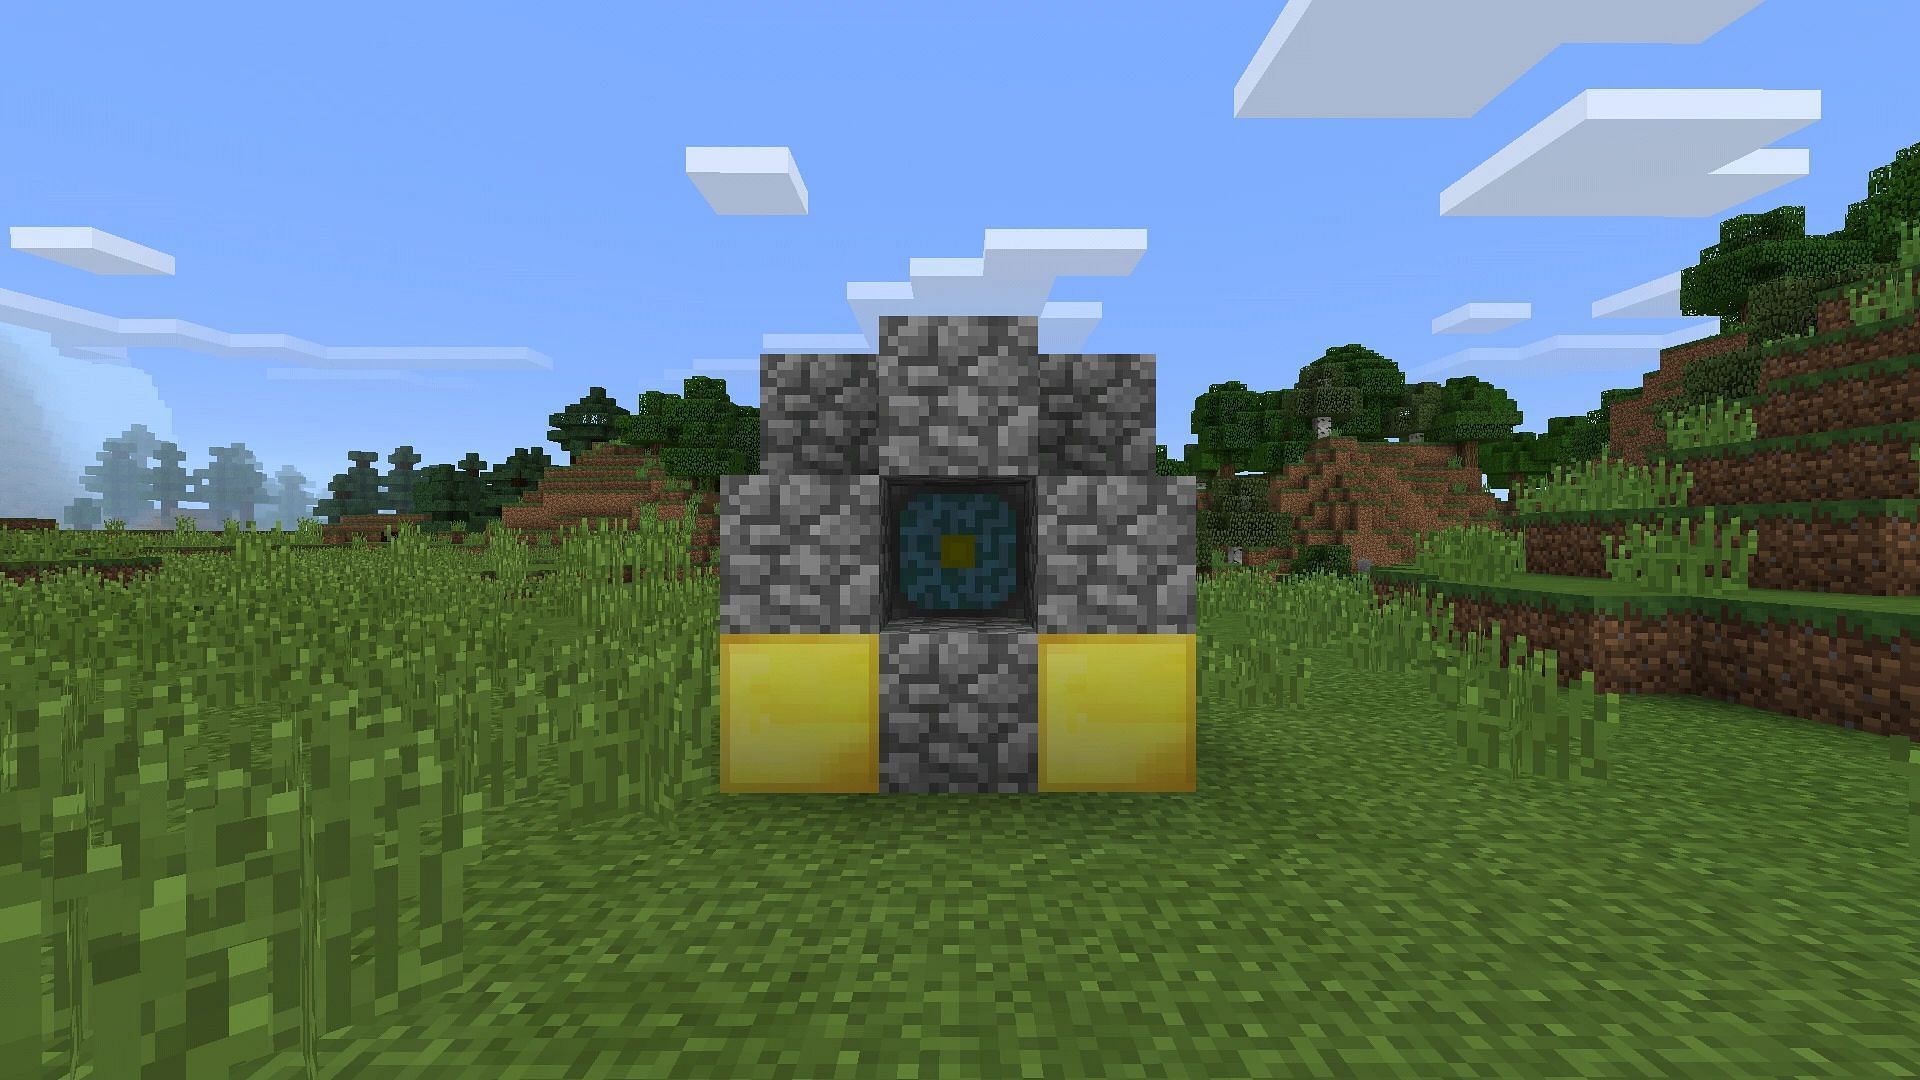 Nether Reactor was a player-built structure from which players obtained Nether-related items in Minecraft Pocket Edition. (Image via Mojang)